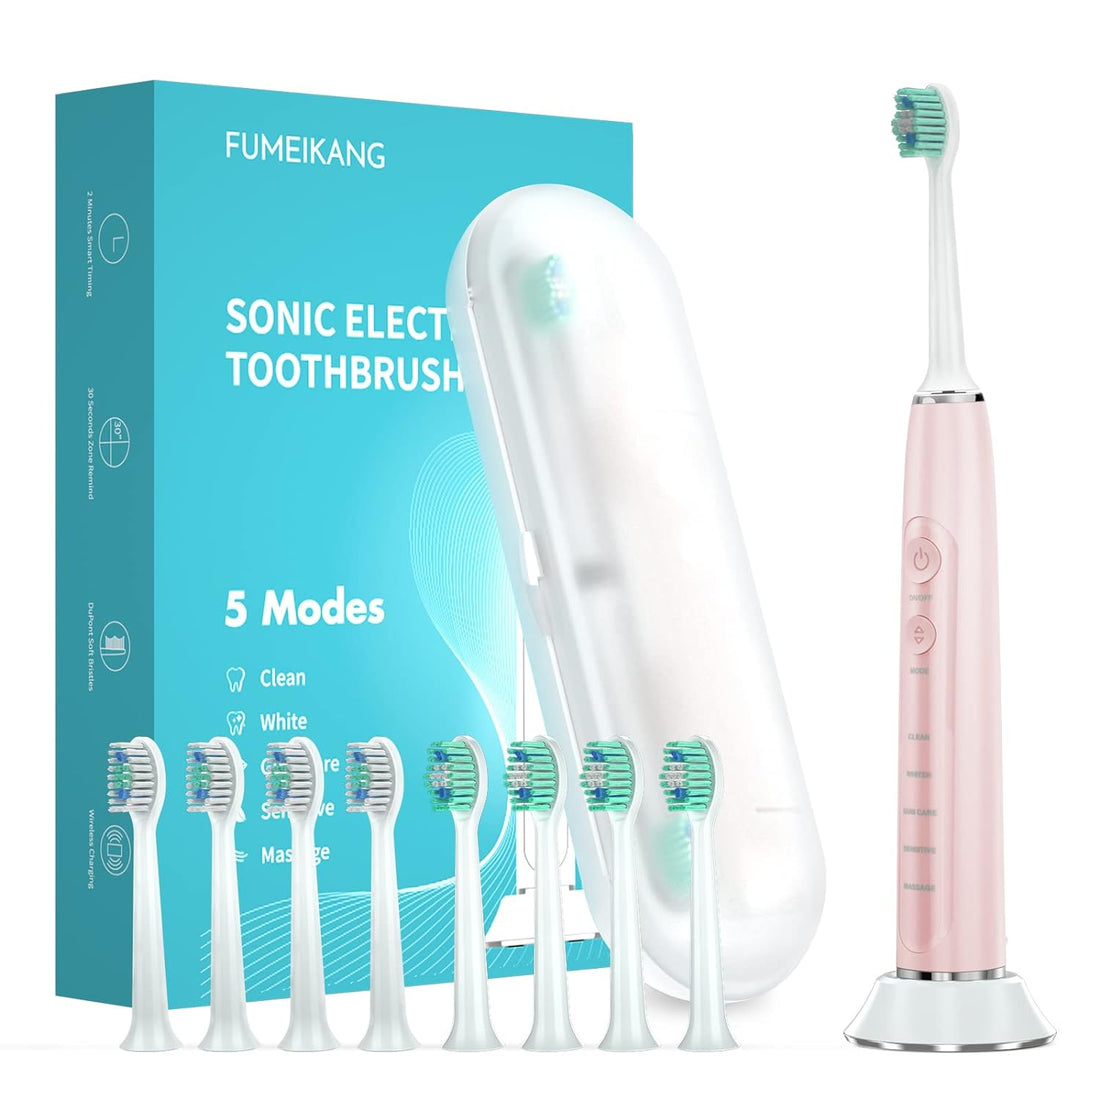 FUMEIKANG Sonic Electric Toothbrush for Adults Rechargeable Power Tooth Brushes Double Keys-N Series-Pink